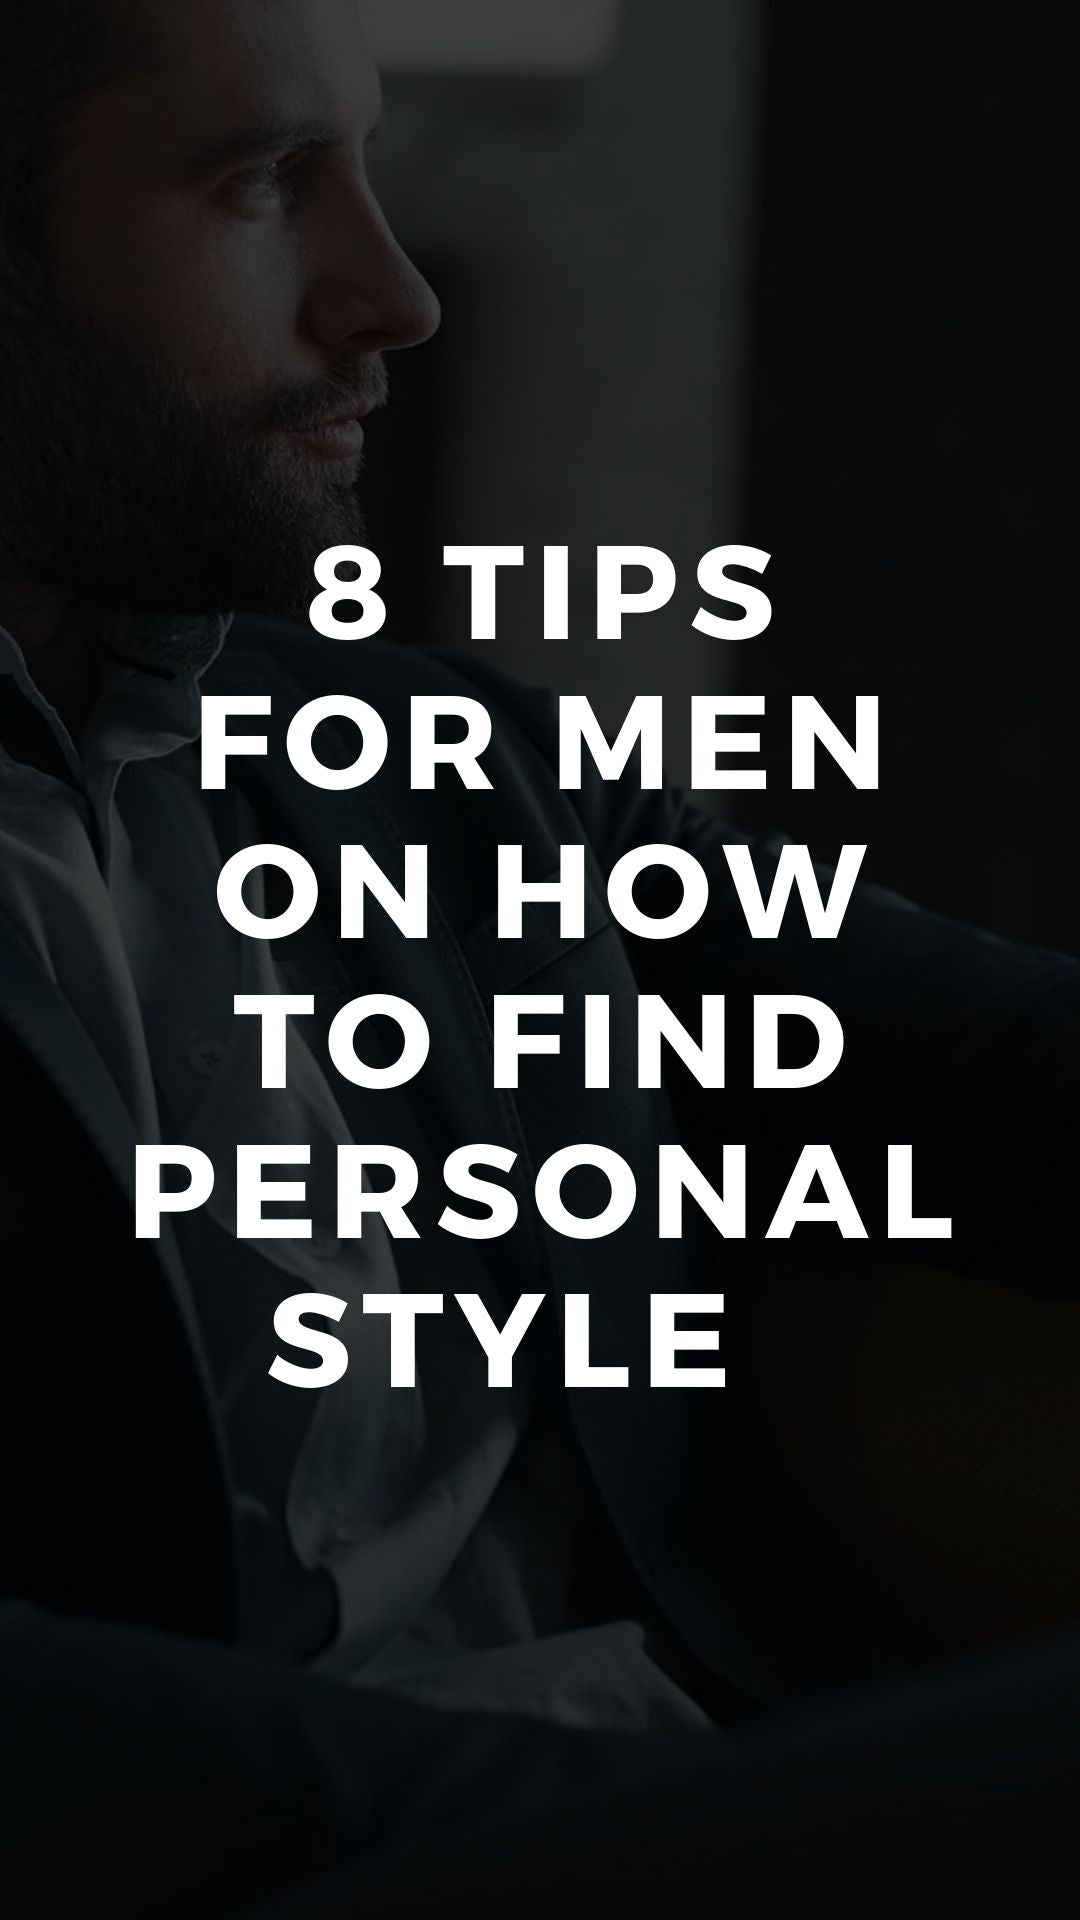 8 Tips For Men On How To Find Personal Style in The Modern World ...